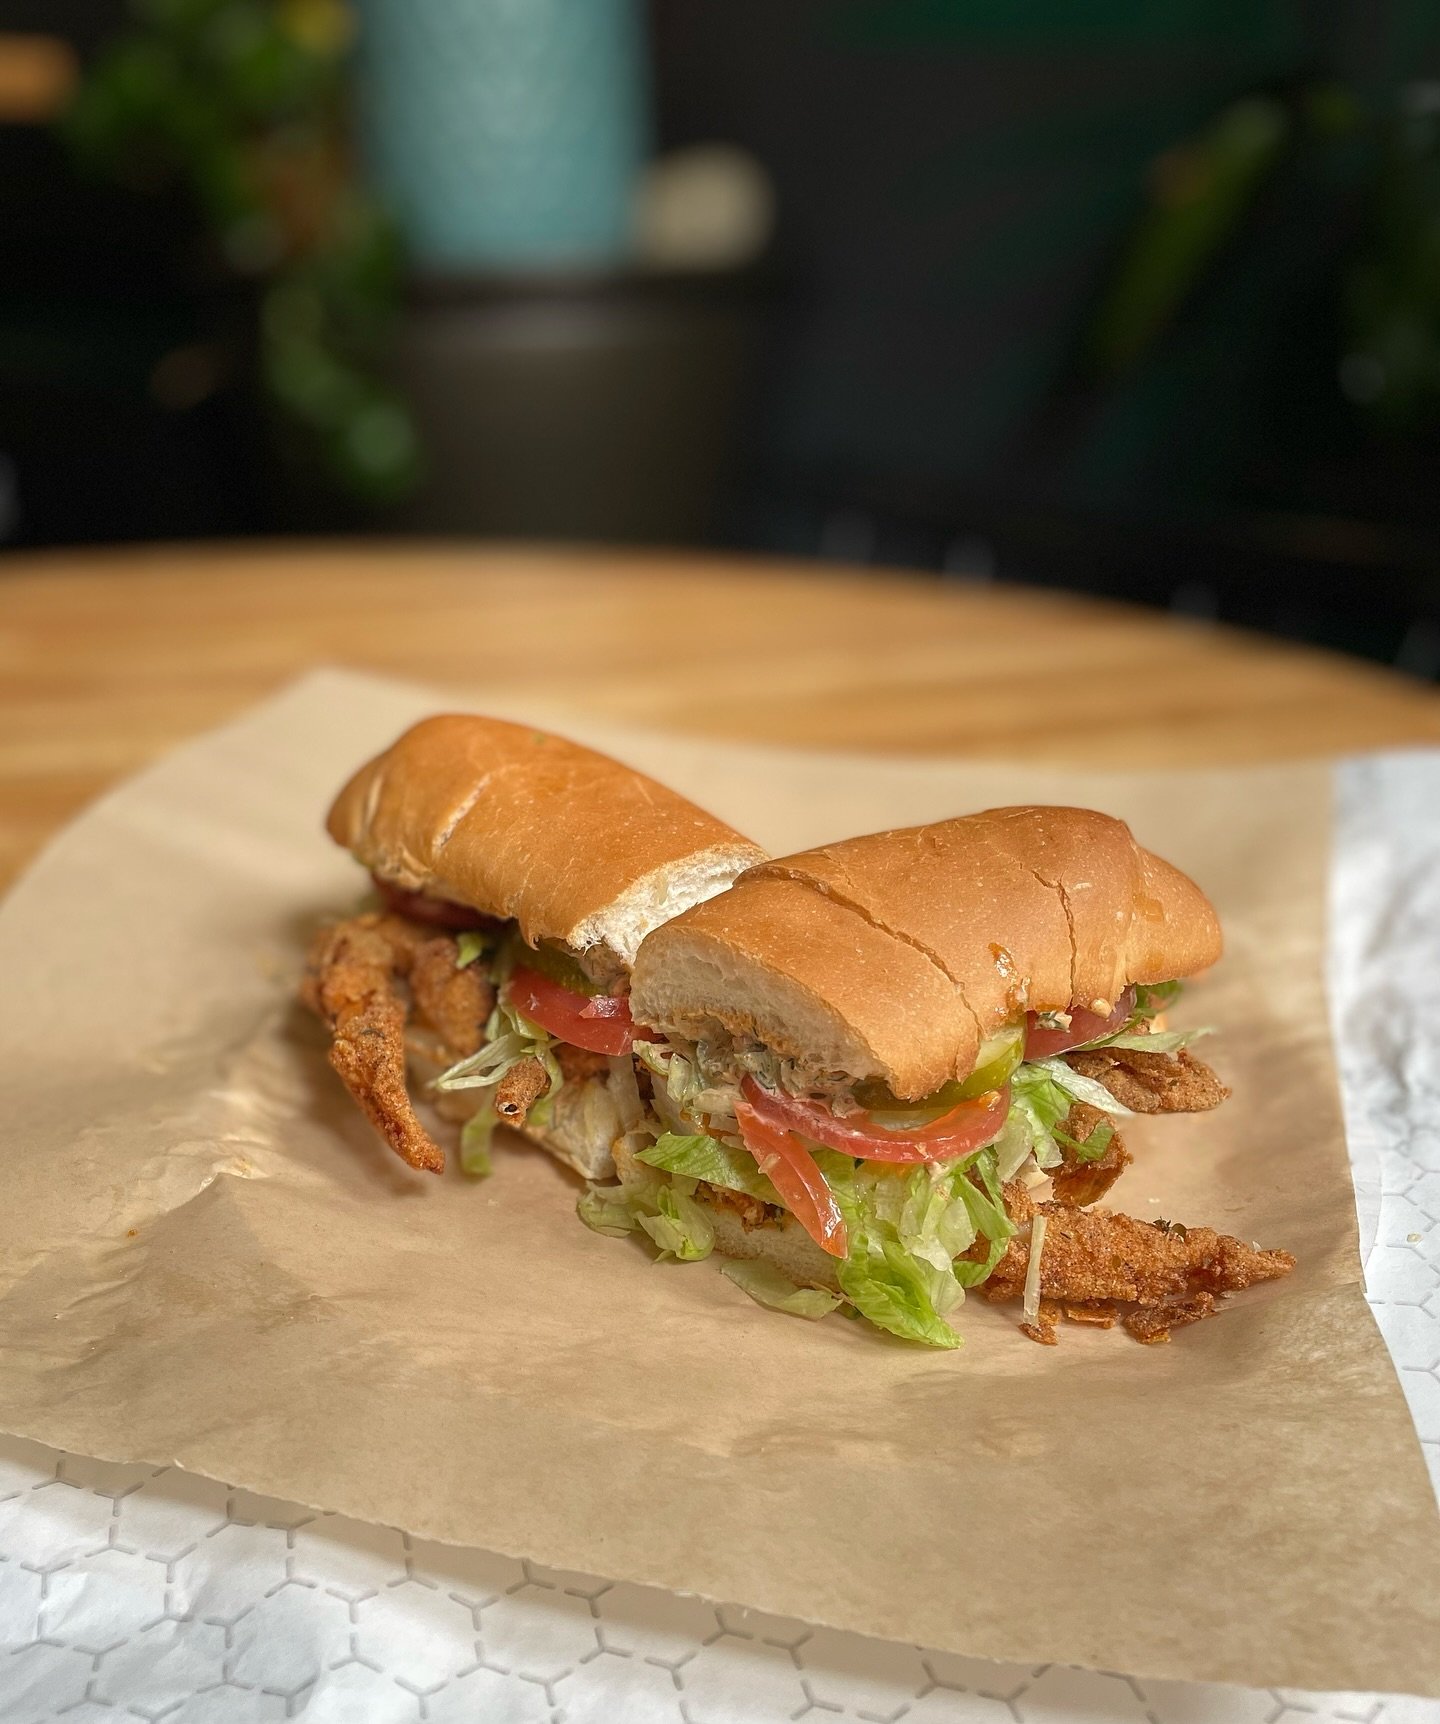 Have we got a deal for you today! 2 Soft Shell Crab Po&rsquo; Boys for $24 🦀

Get one for yourself and one for a friend (or both for yourself 😏) 

Come by and try one of our delicious Po&rsquo; Boys and soak up some sun on our patio ☀️ or get it de